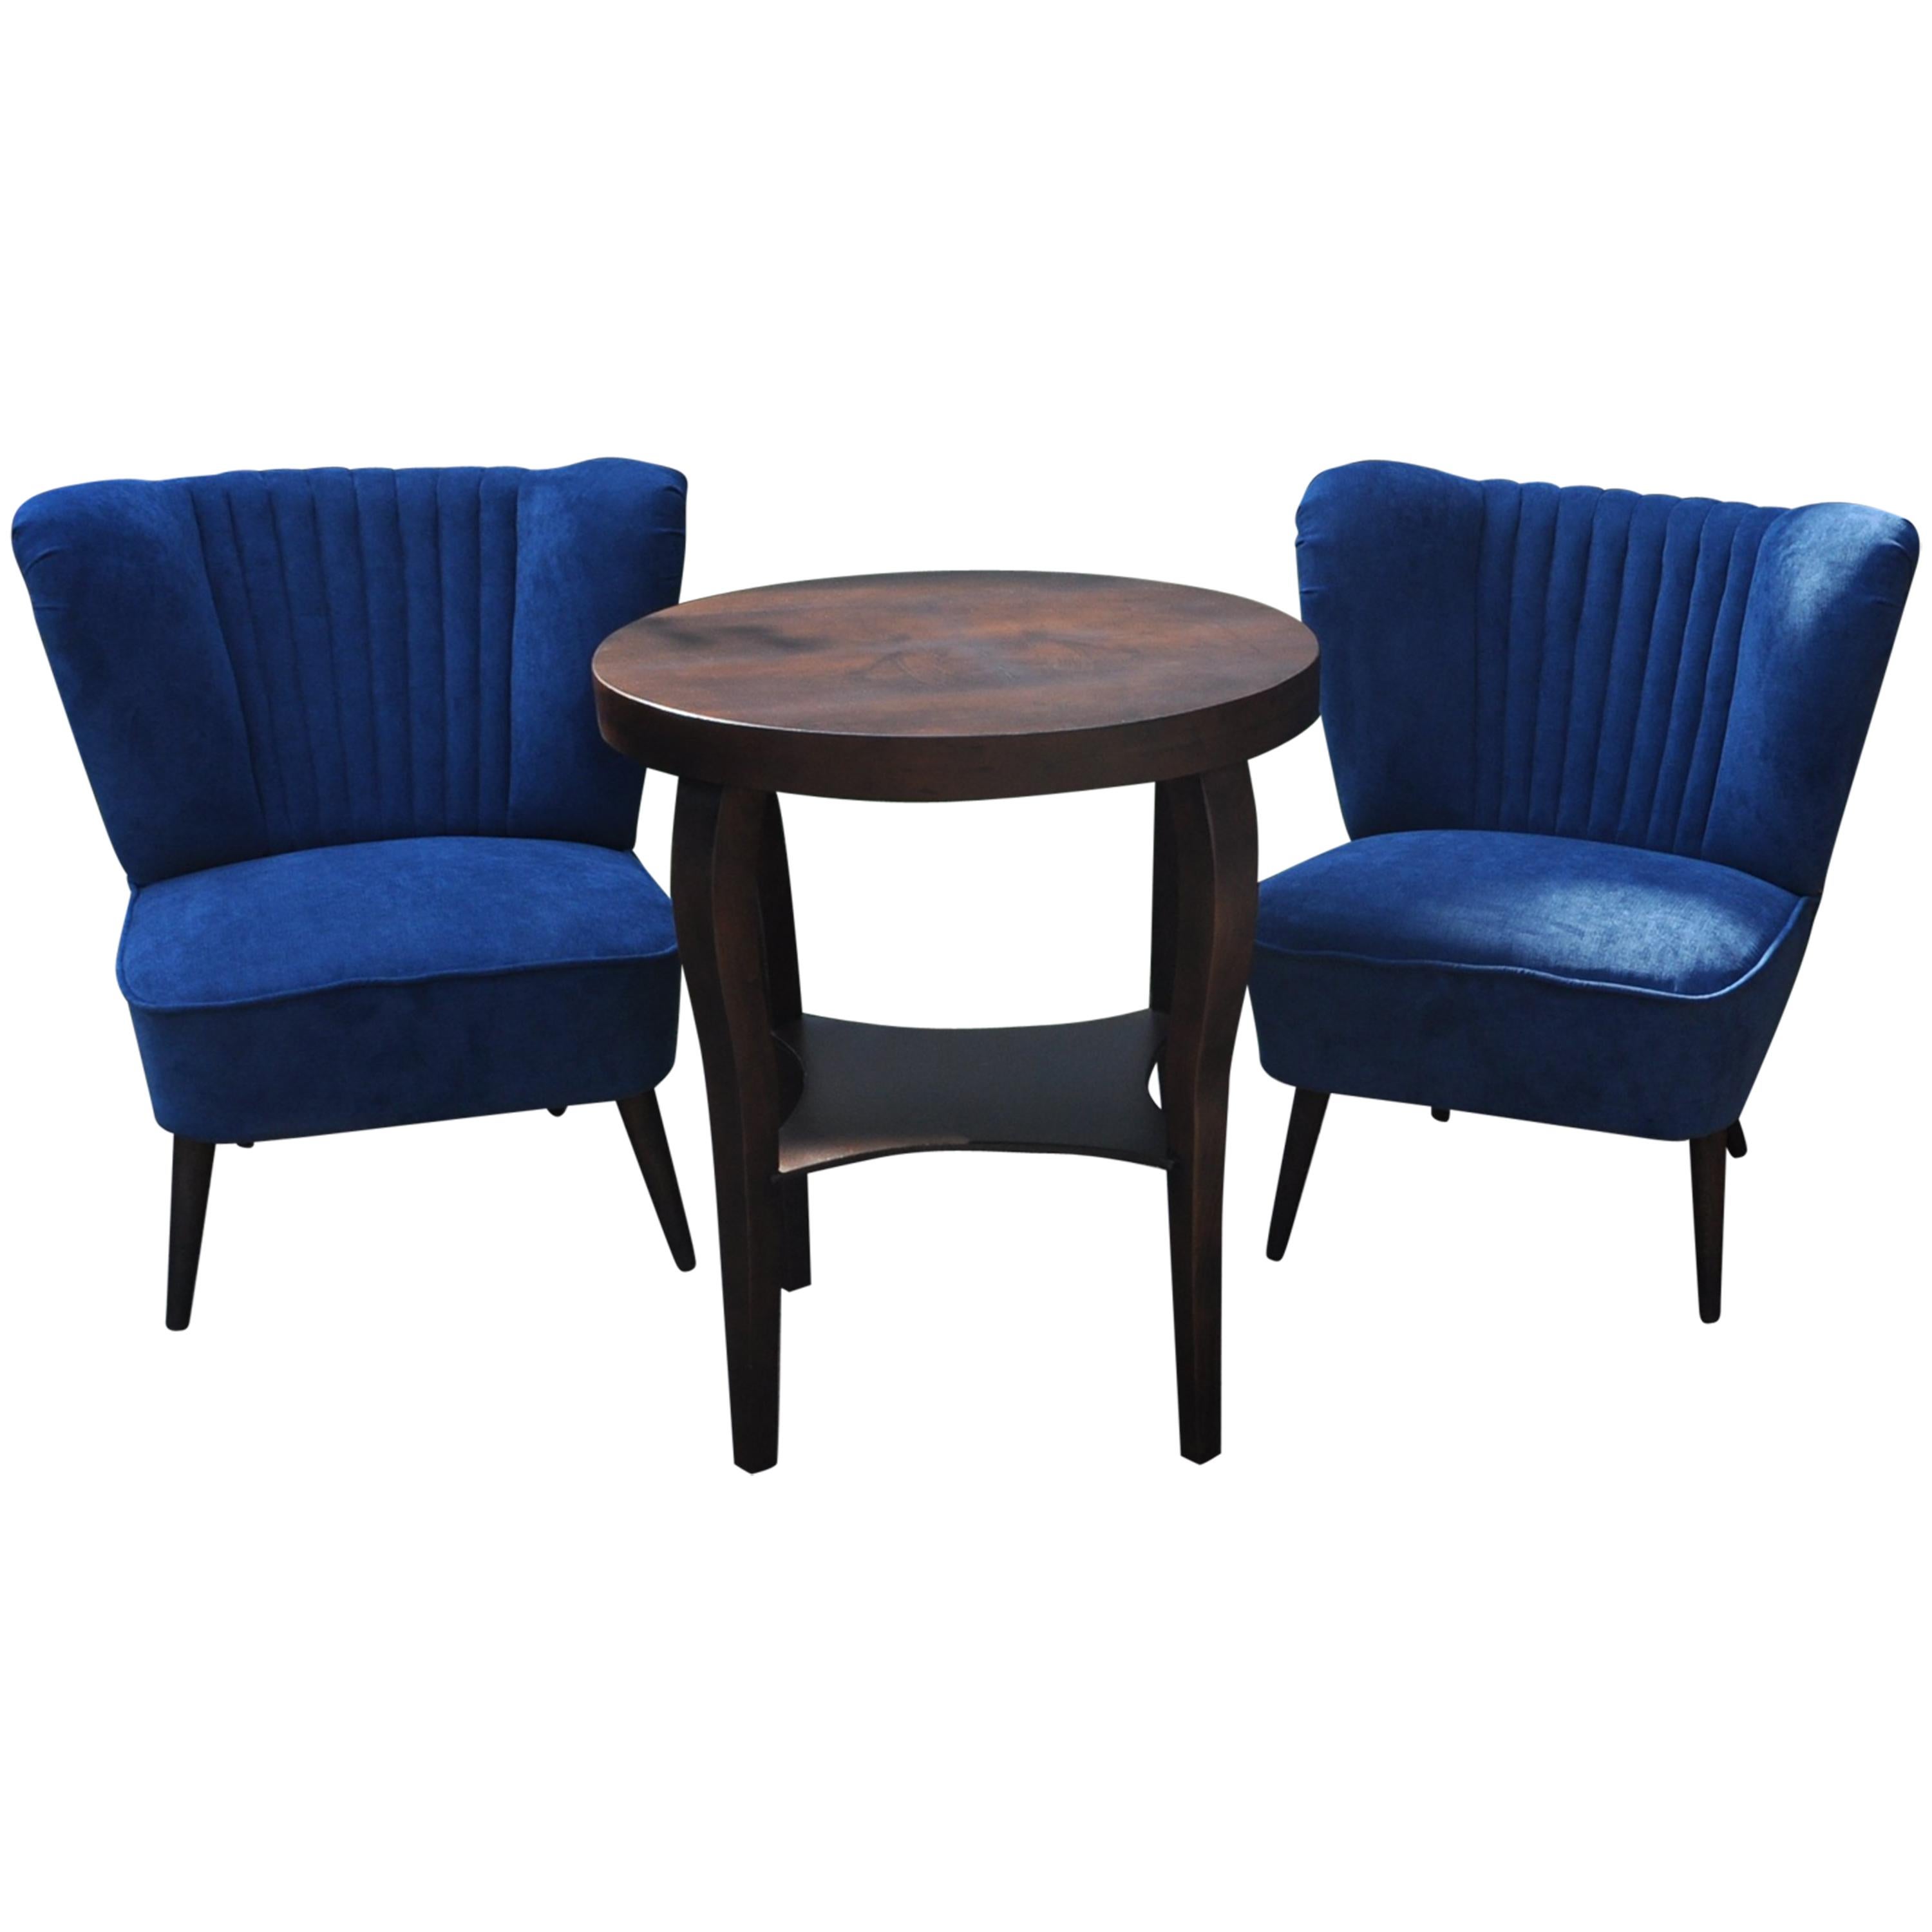 Pair of Cocktail Chairs with Blue Fabric For Sale